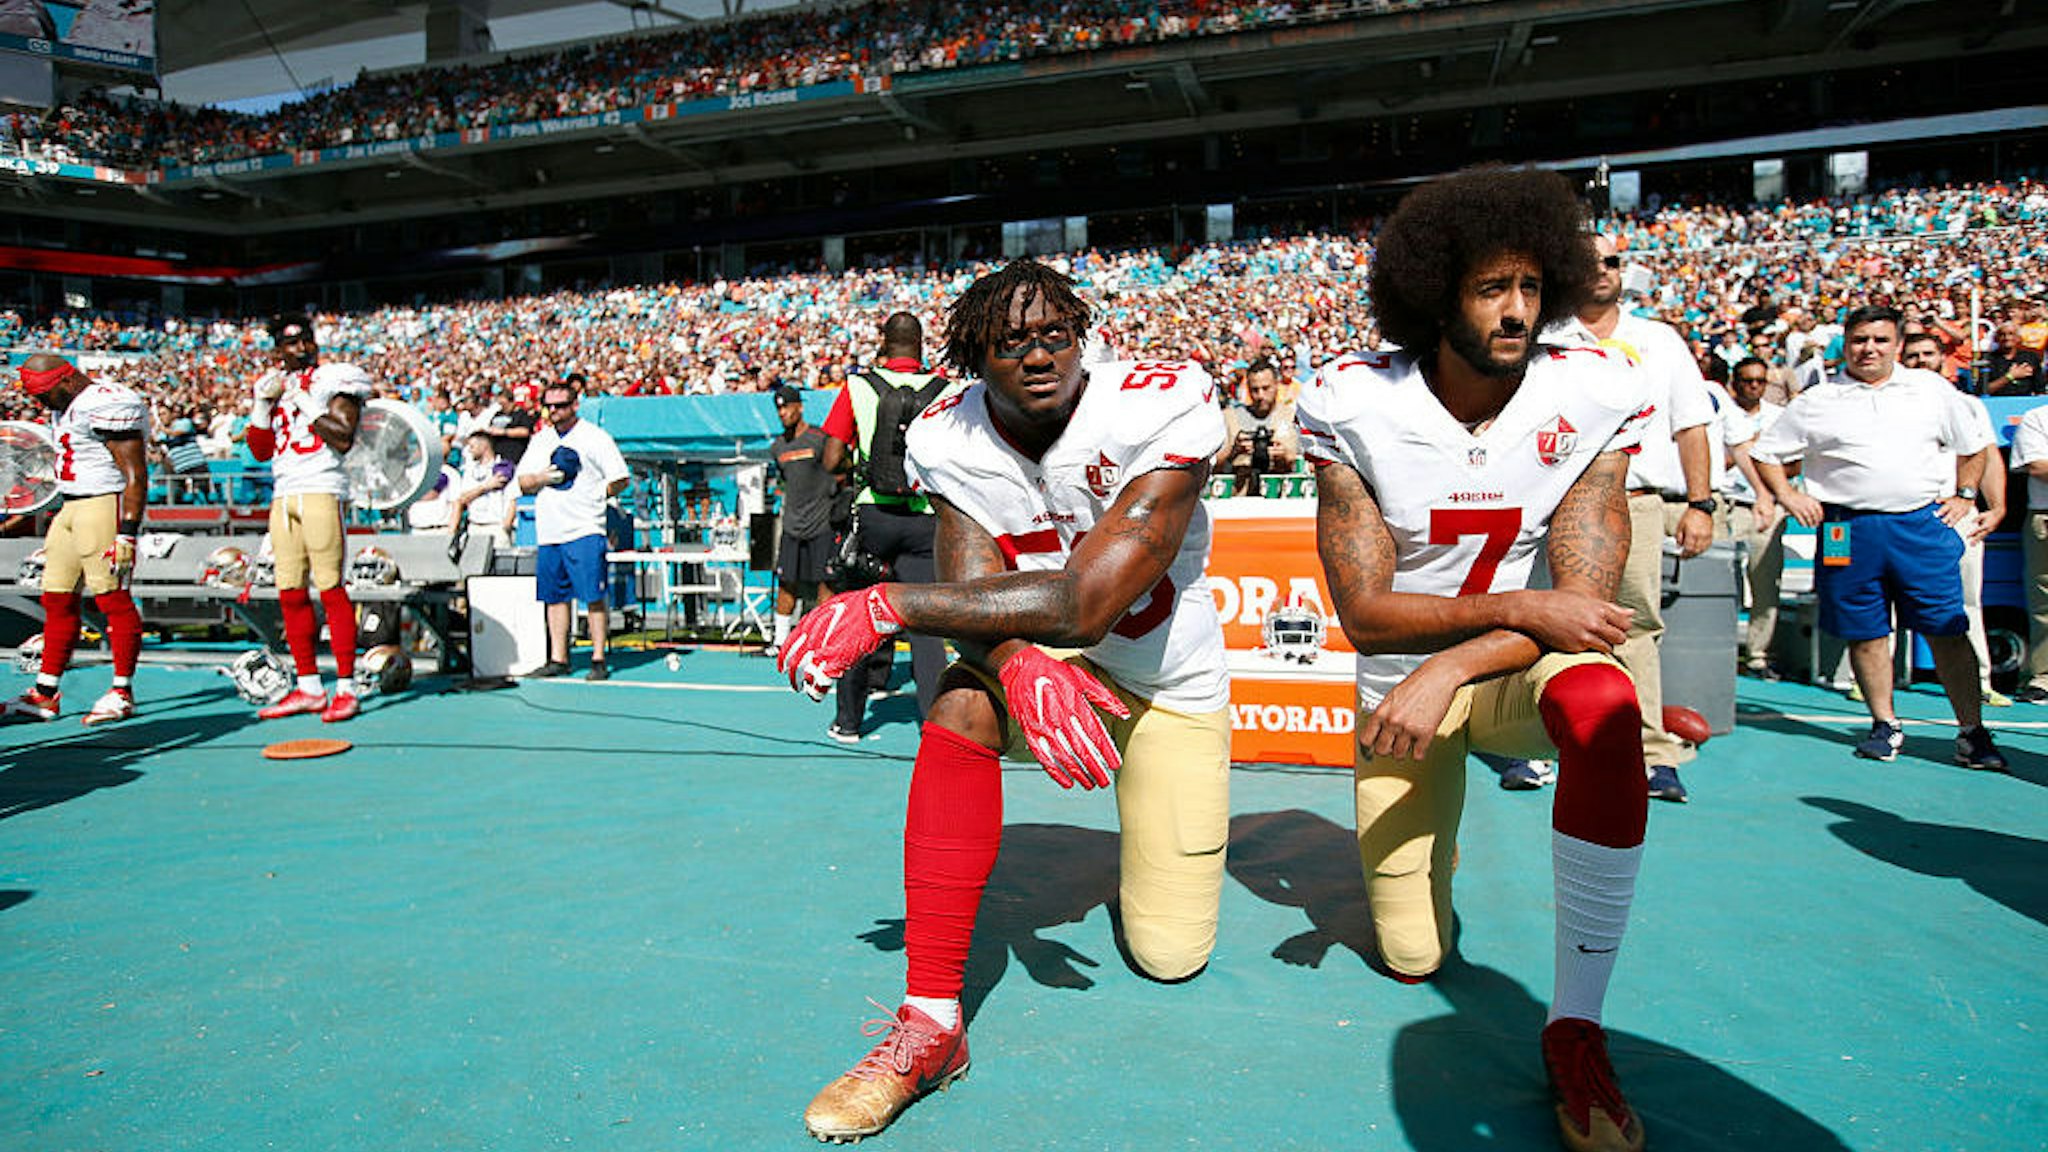 Eli Harold #58 and Colin Kaepernick #7 of the San Francisco 49ers kneel on the sideline, during the anthem, prior to the game against the Miami Dolphins at Hard Rock Stadium on November 27, 2016 in Miami Gardens, Florida. The Dolphins defeated the 49ers 31-24. (Photo by Michael Zagaris/San Francisco 49ers/Getty Images)